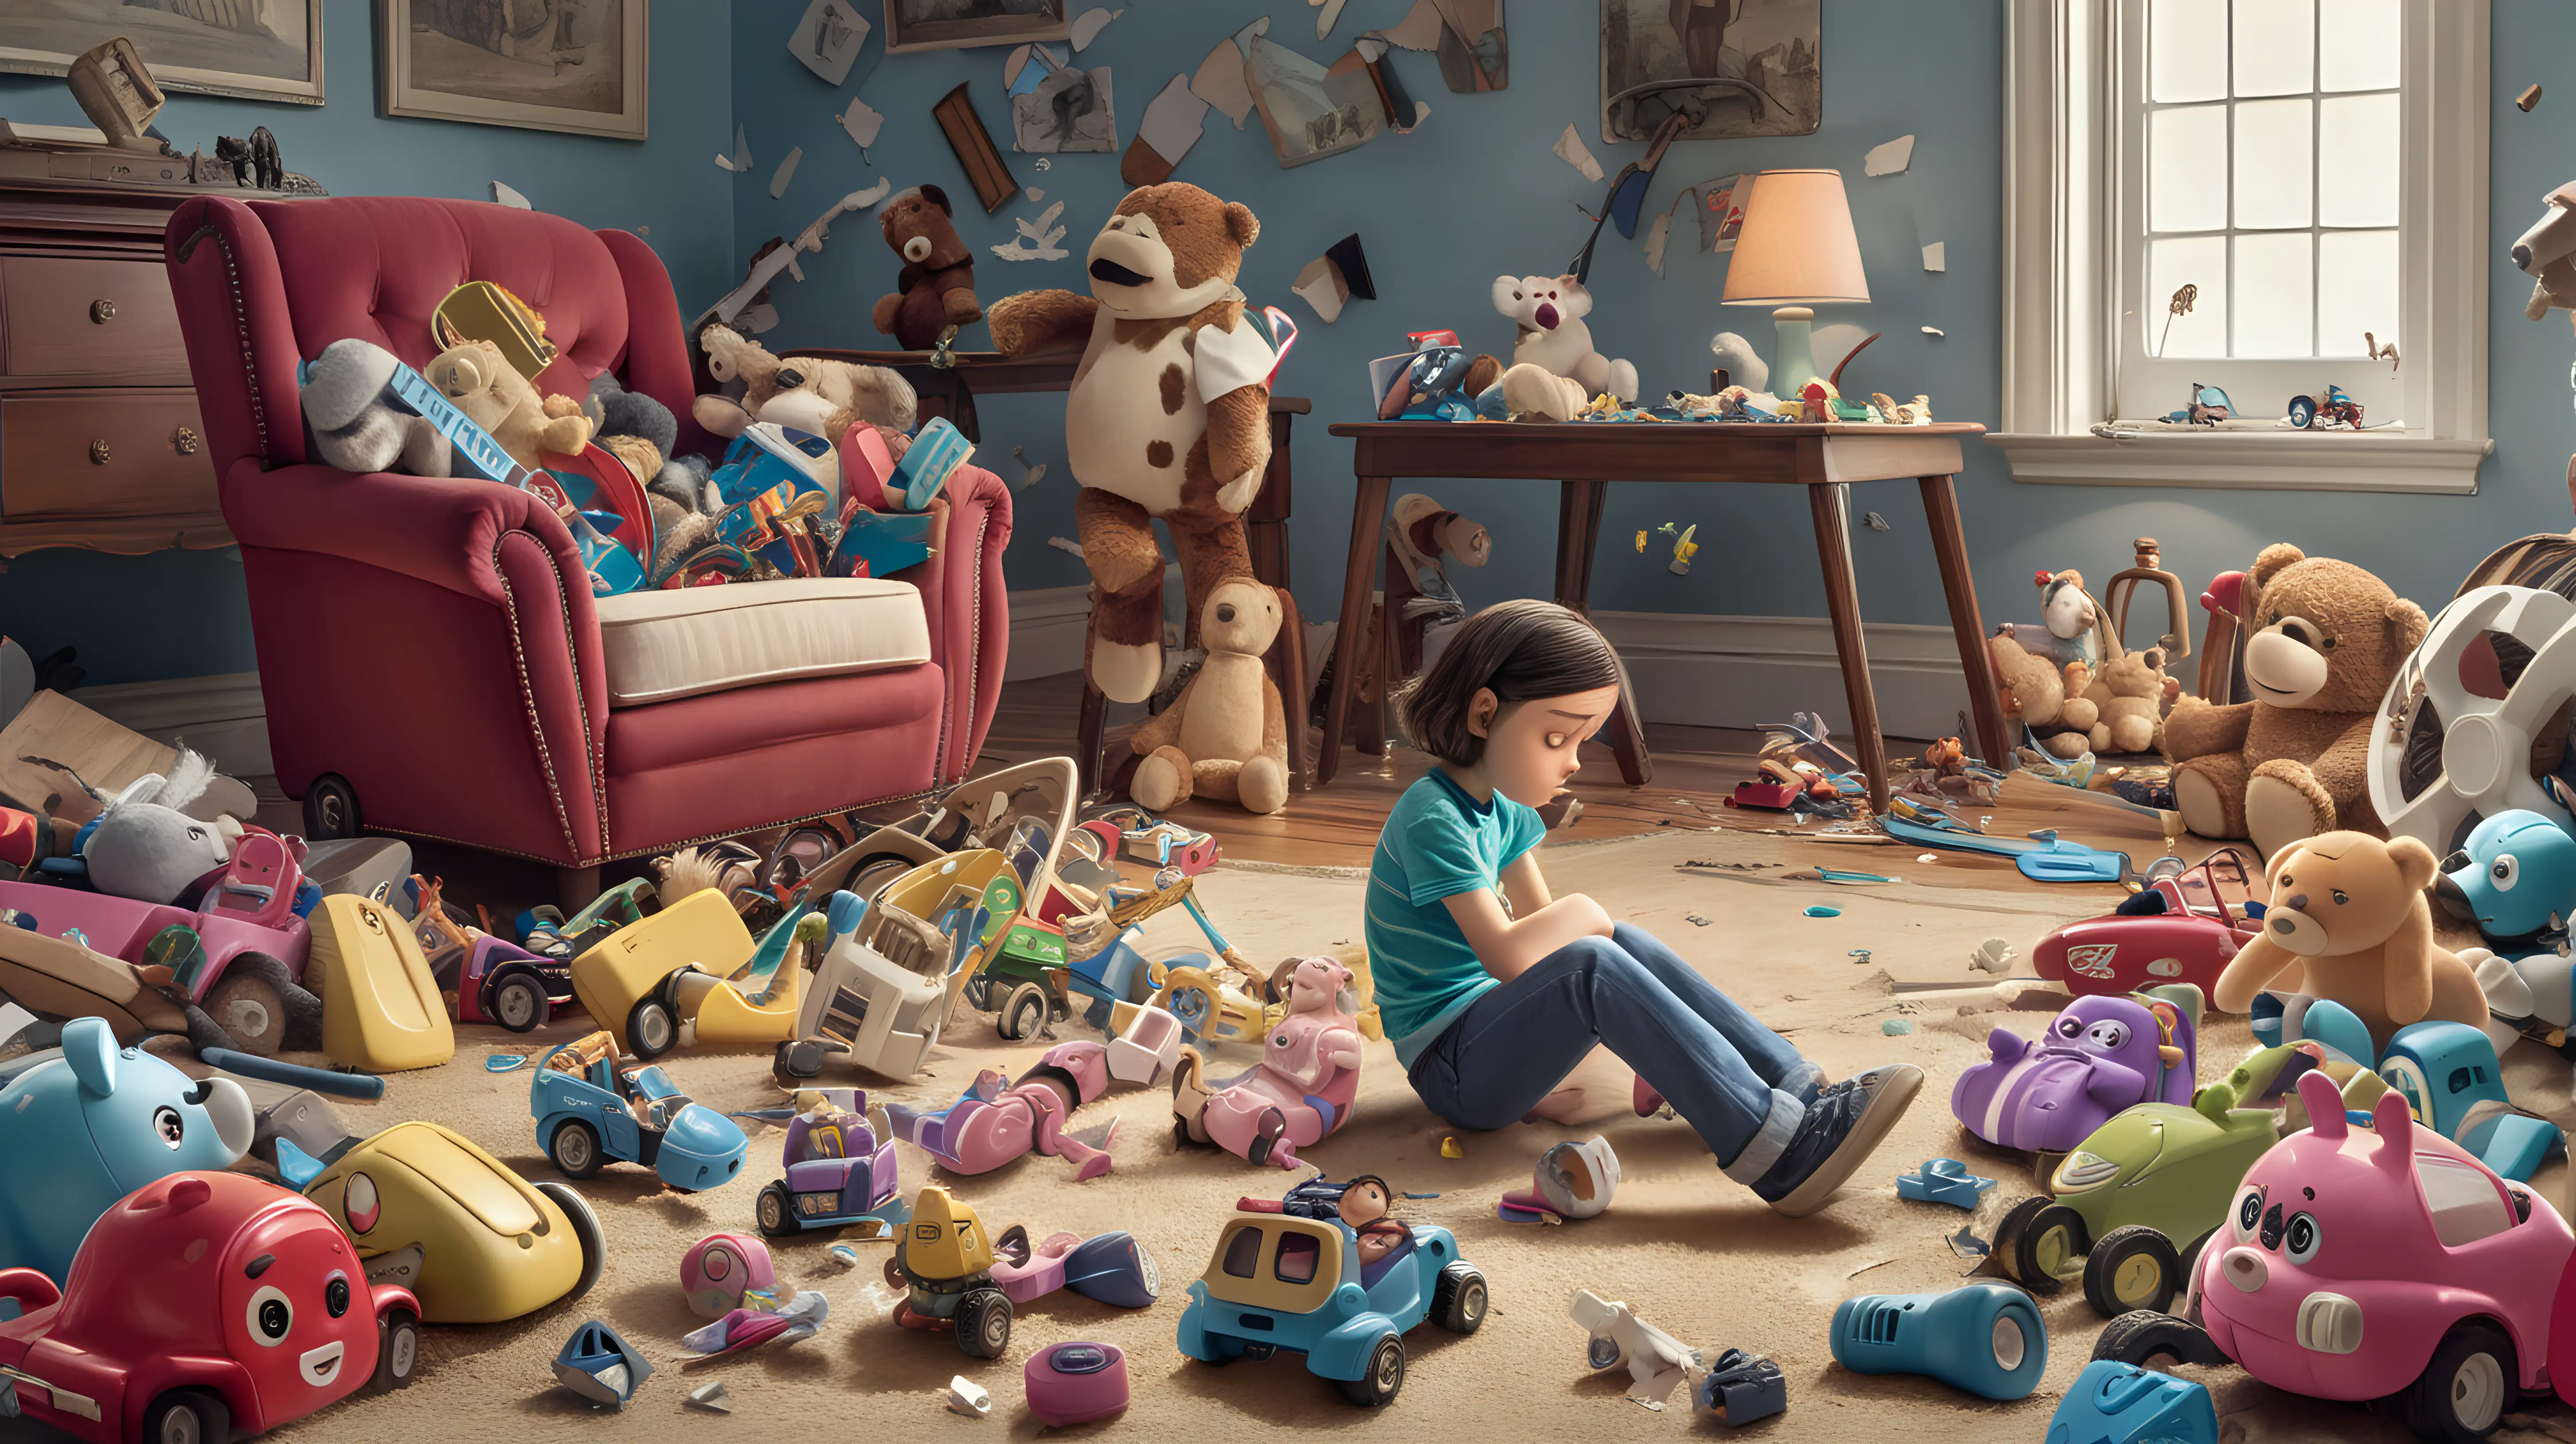 A beautifully illustrated scene of a disappointed character surrounded by broken toys.